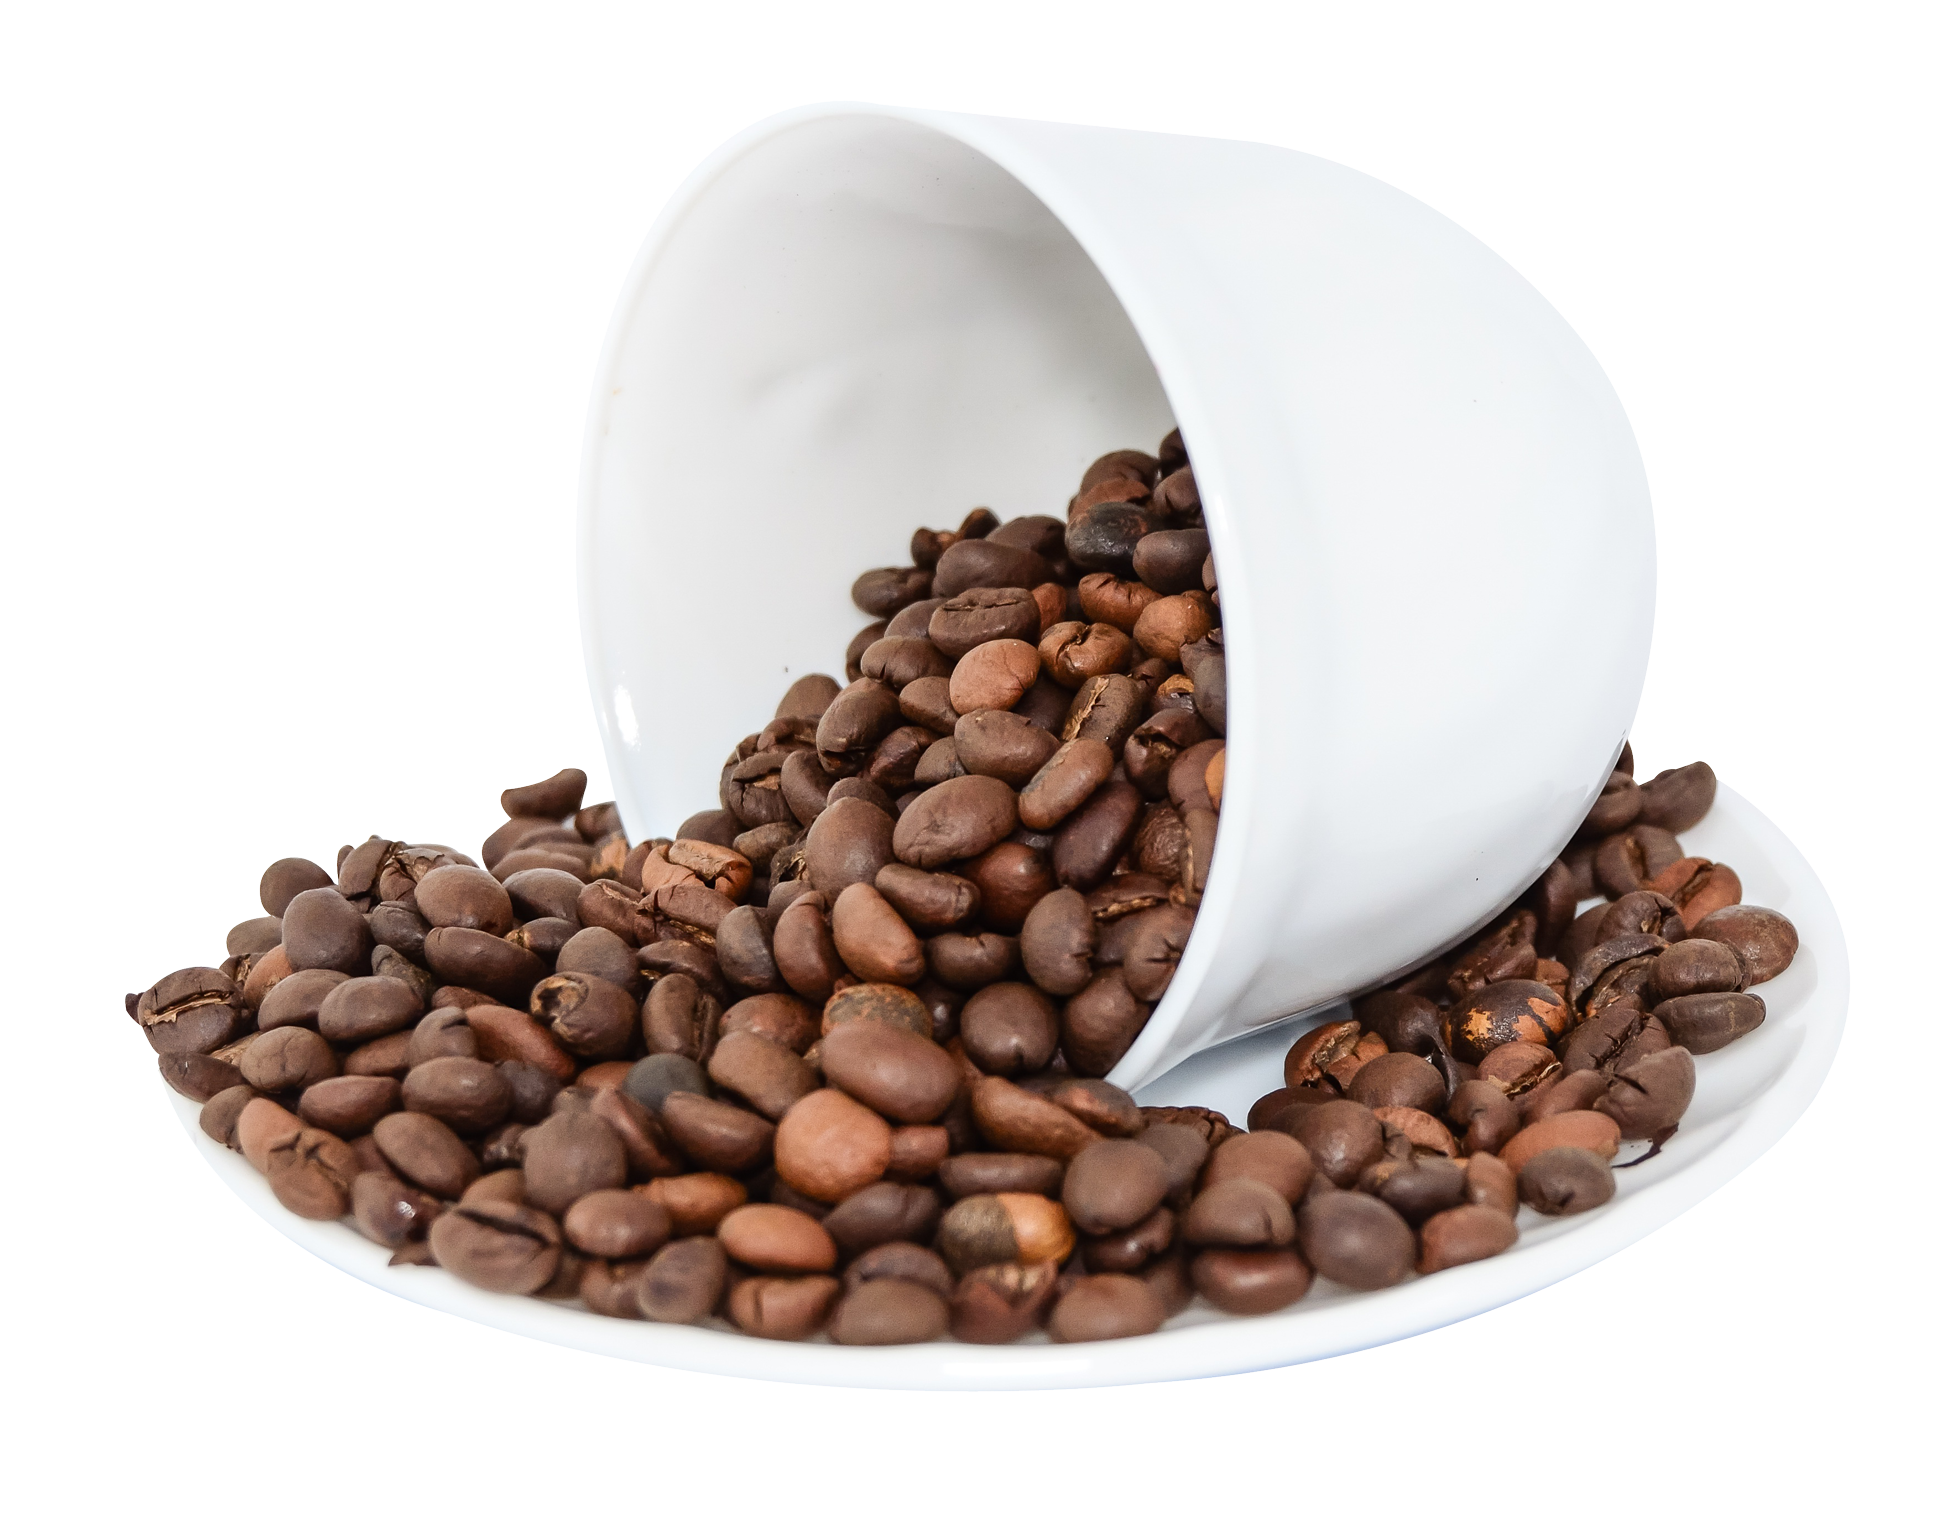 Hdpng - Coffee Beans, Transparent background PNG HD thumbnail